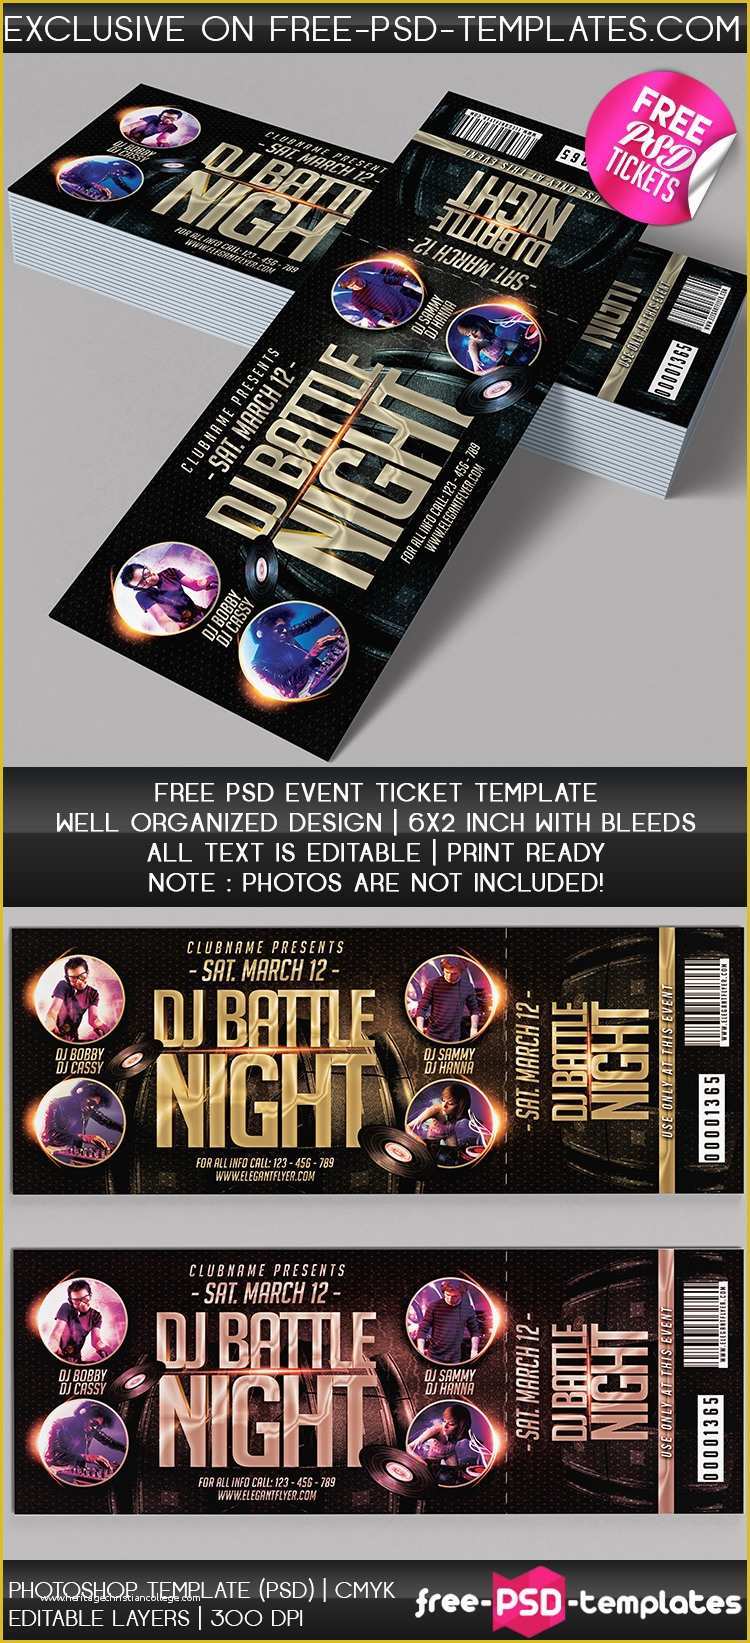 Free Psd Templates Of Free Psd event Tickets